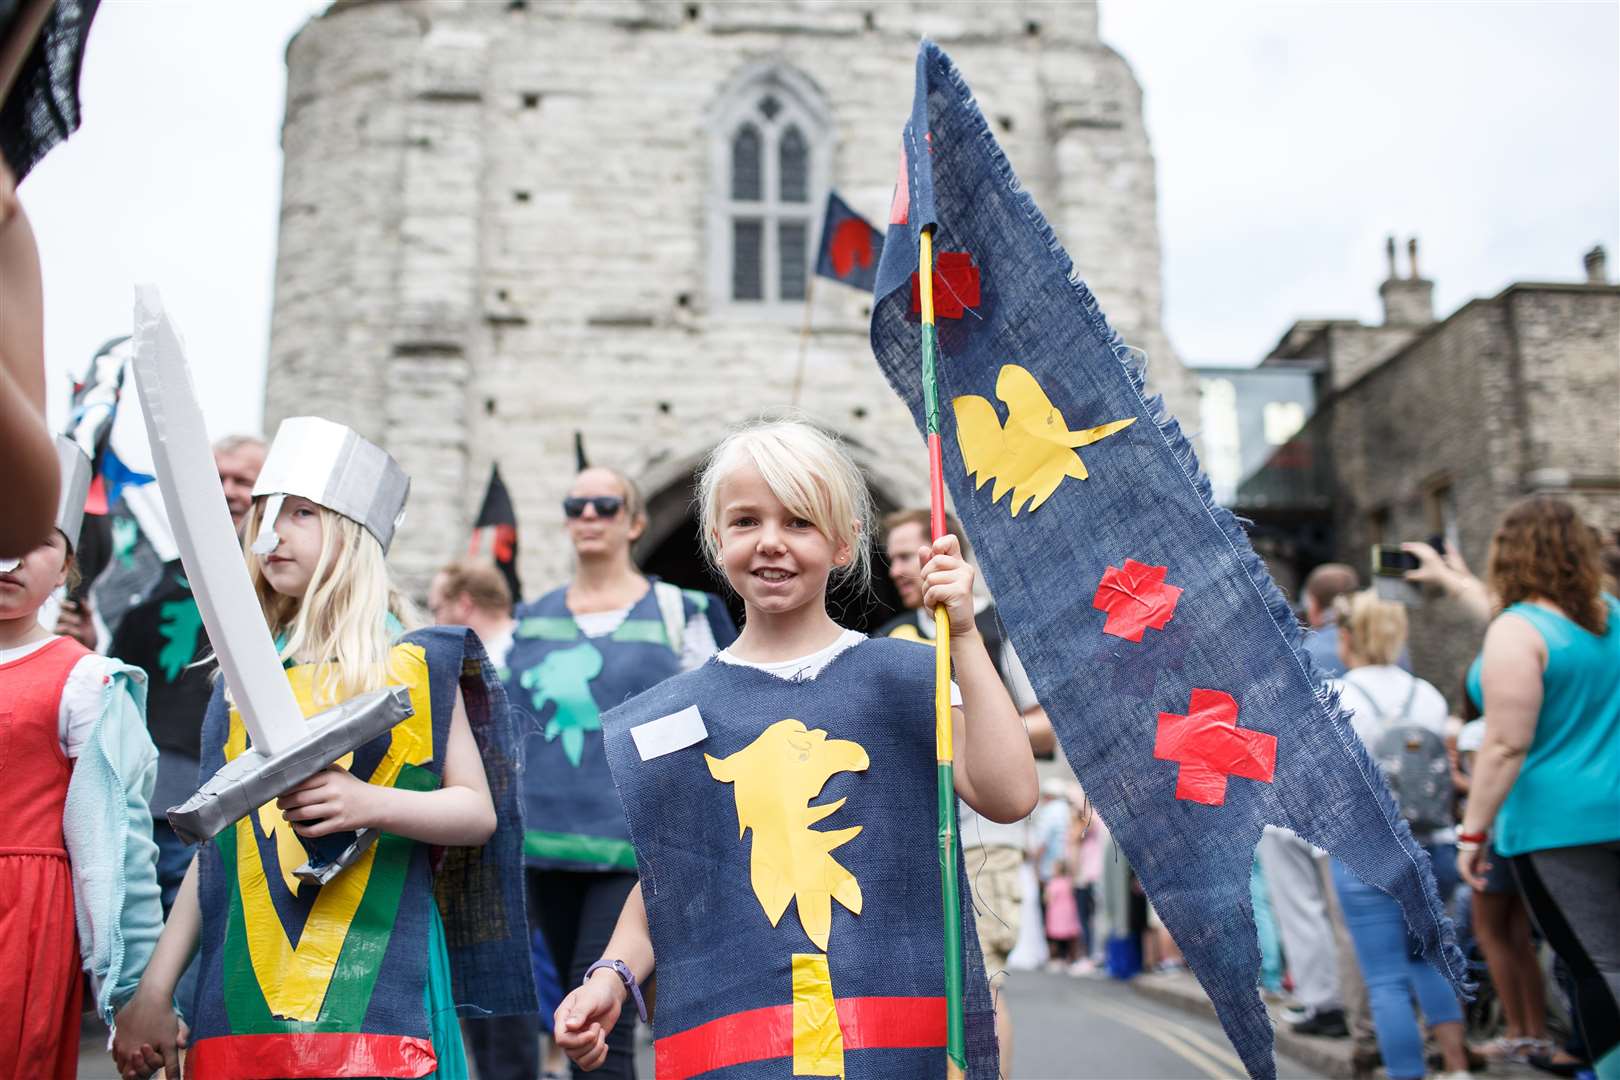 Young Knights at the Medieval Parade in Canterbury. Picture: Matt Wilson